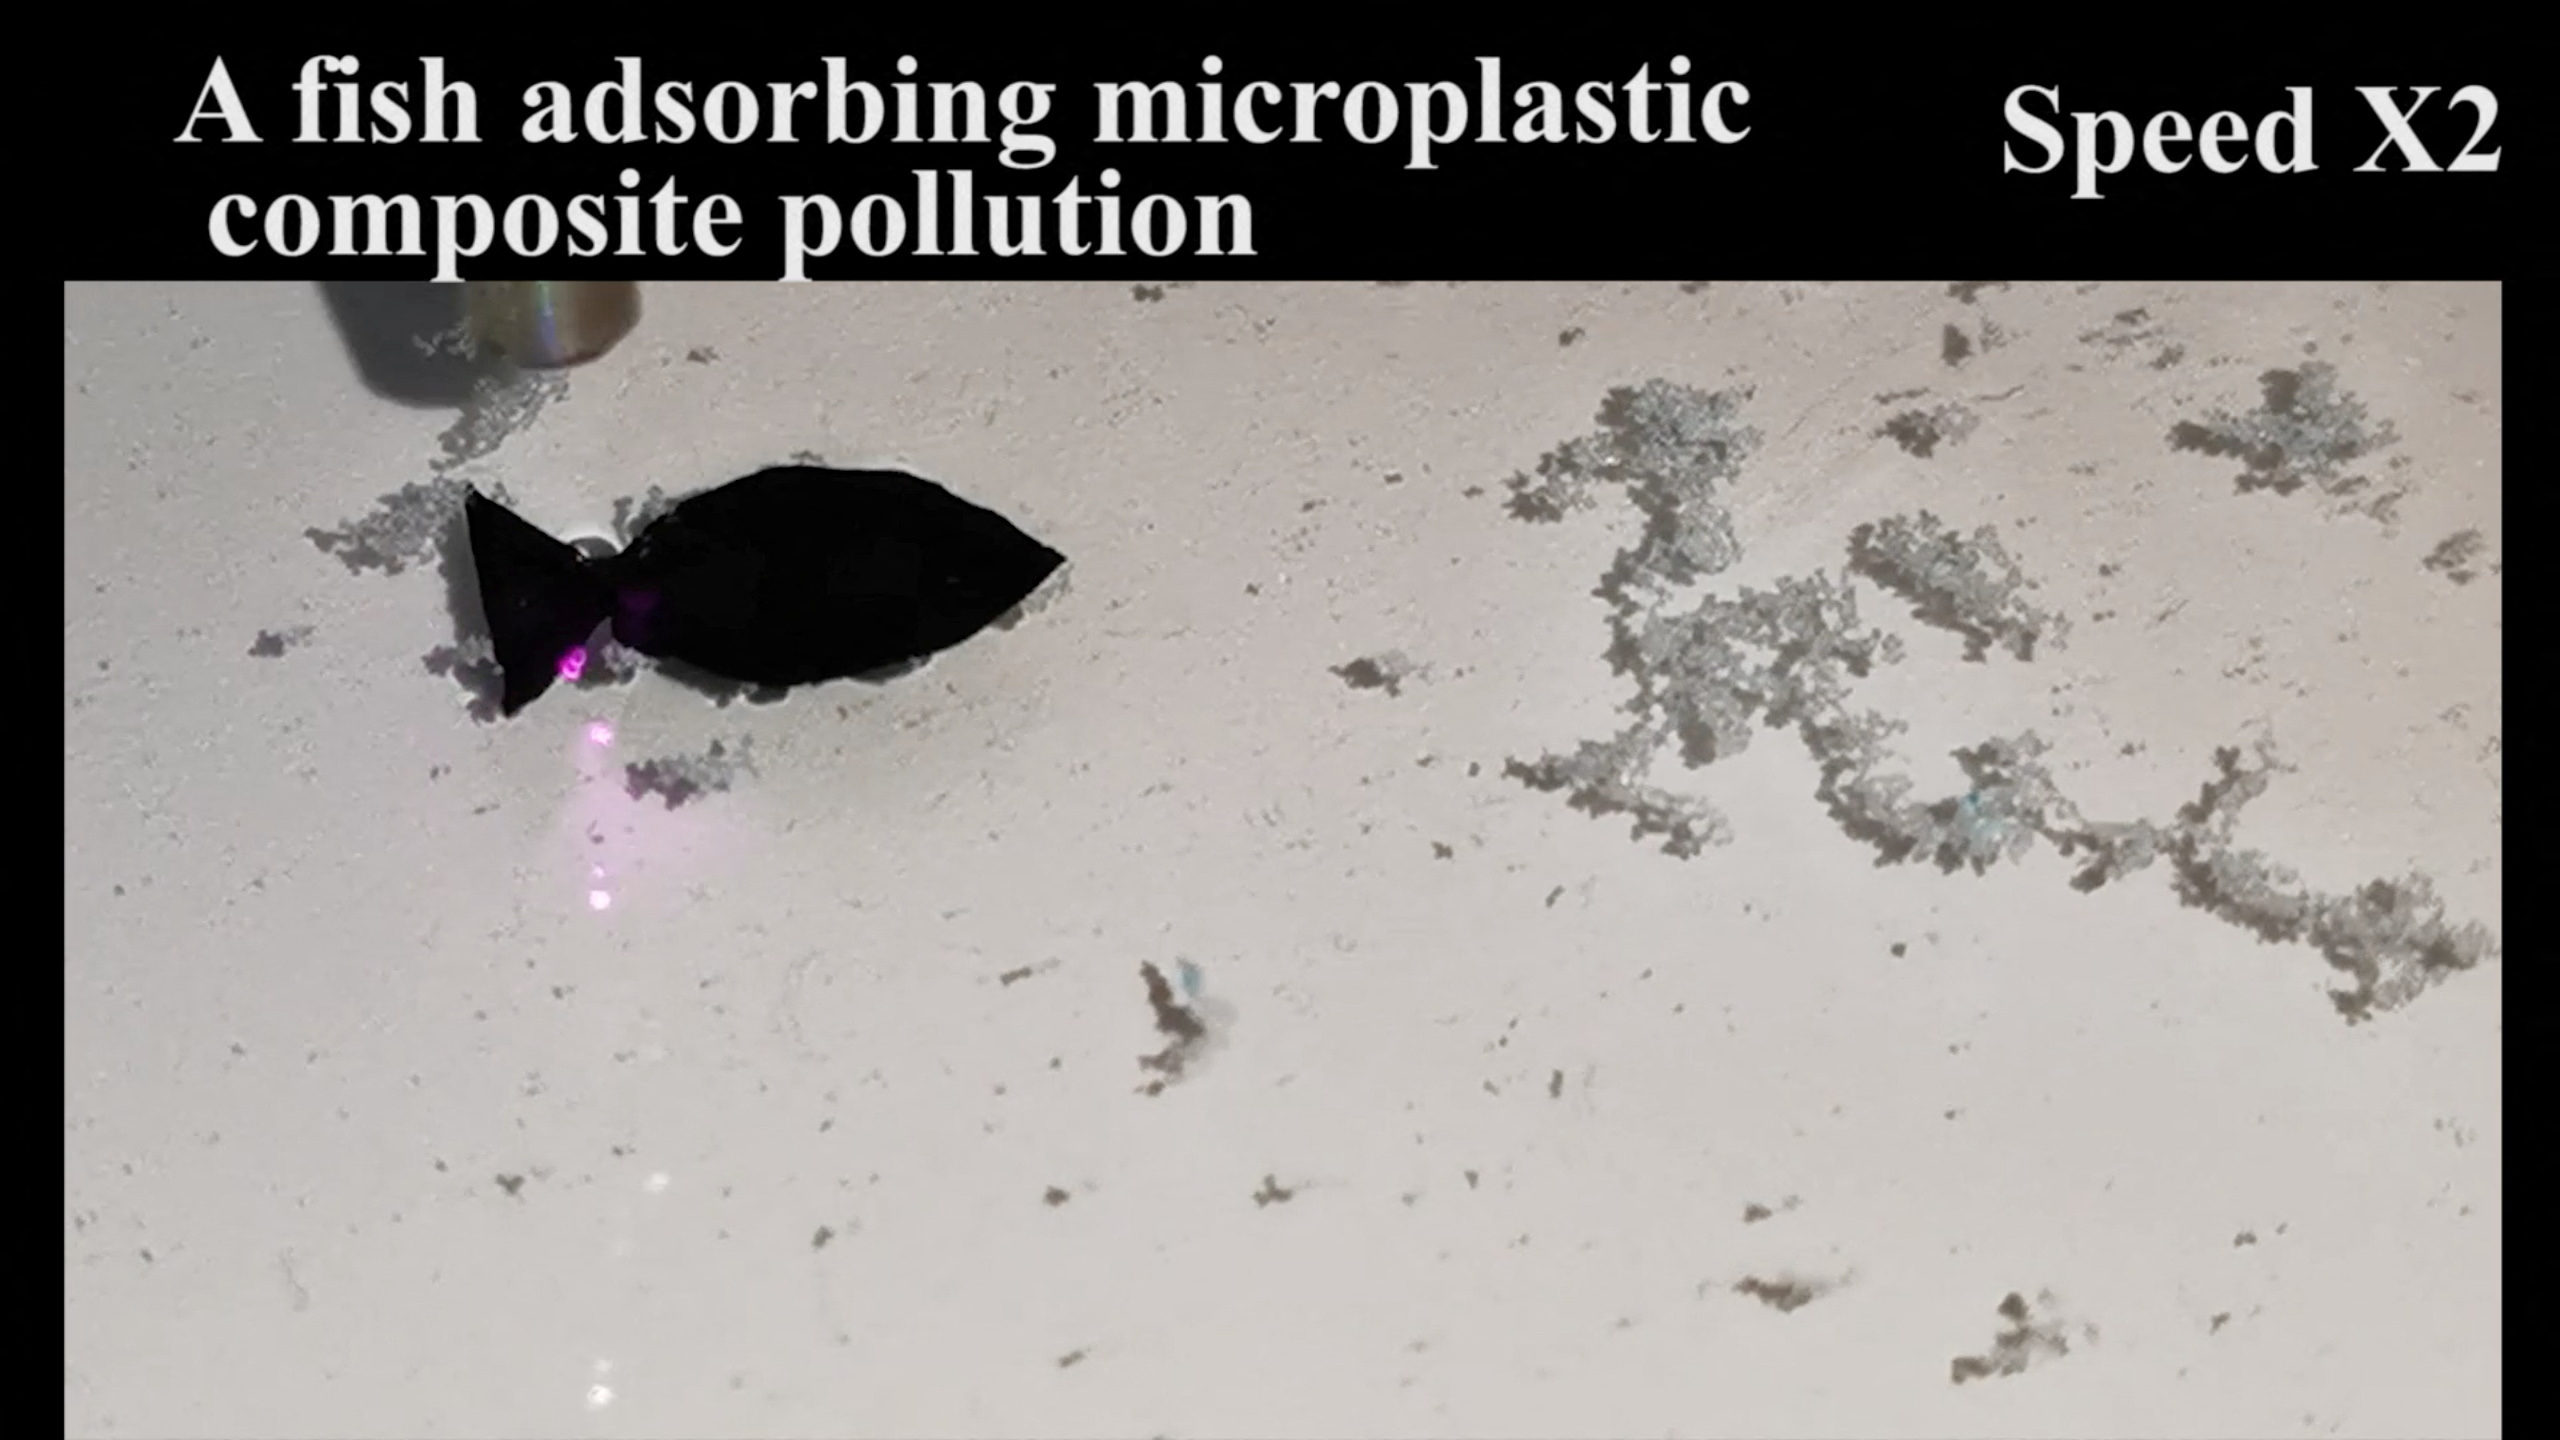 Robo-fish Capable Of Filtering Micro Plastics In Waterways Makes Waves